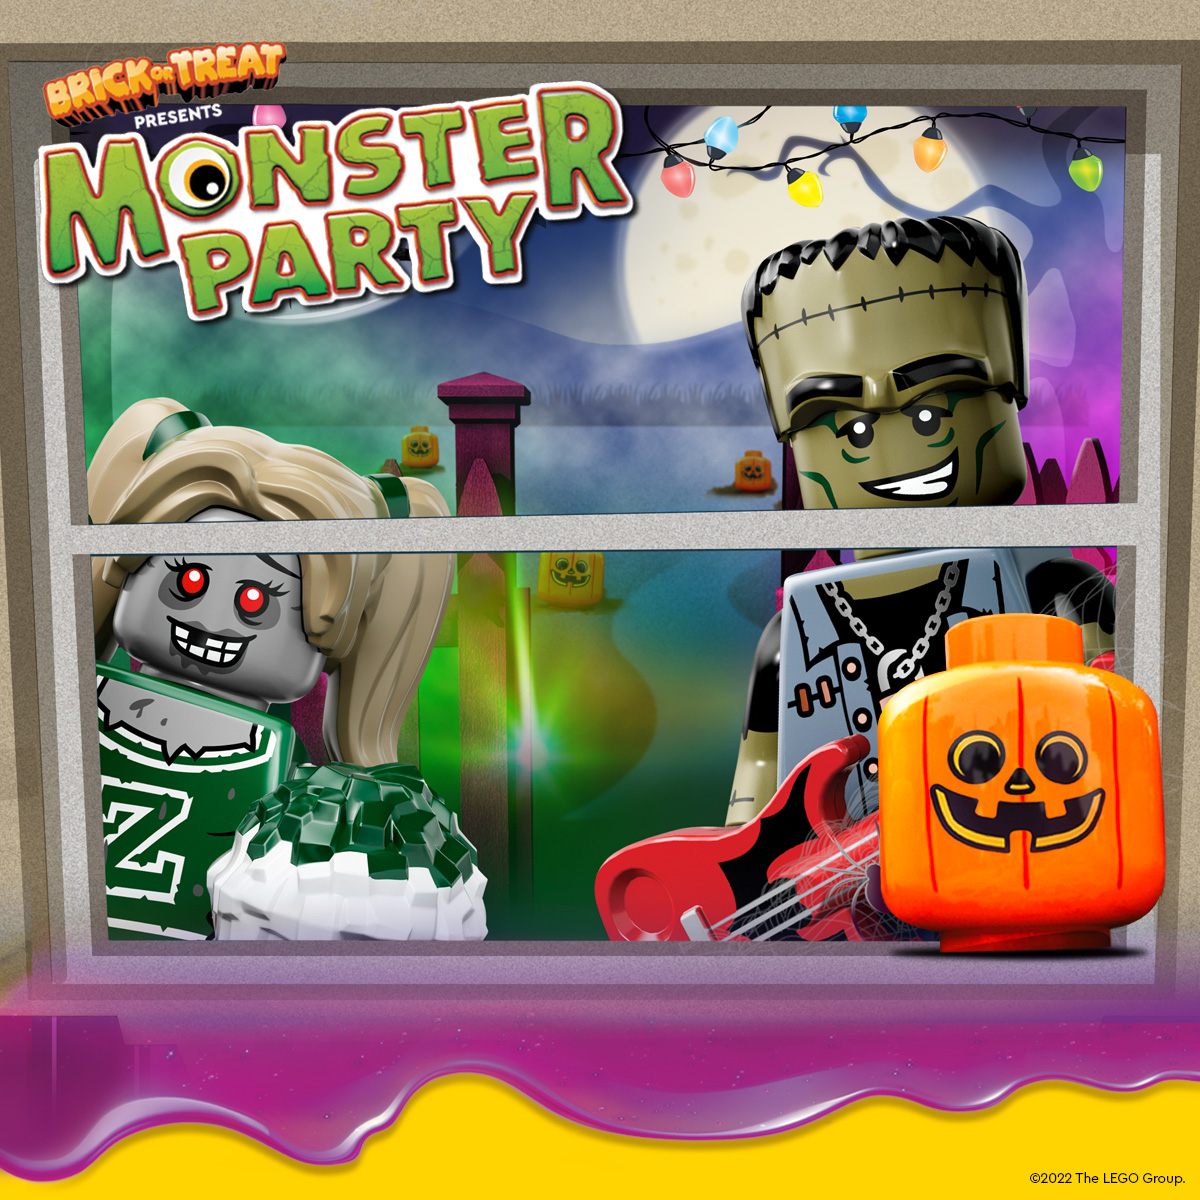 Brick-or-Treat: Monster Party 